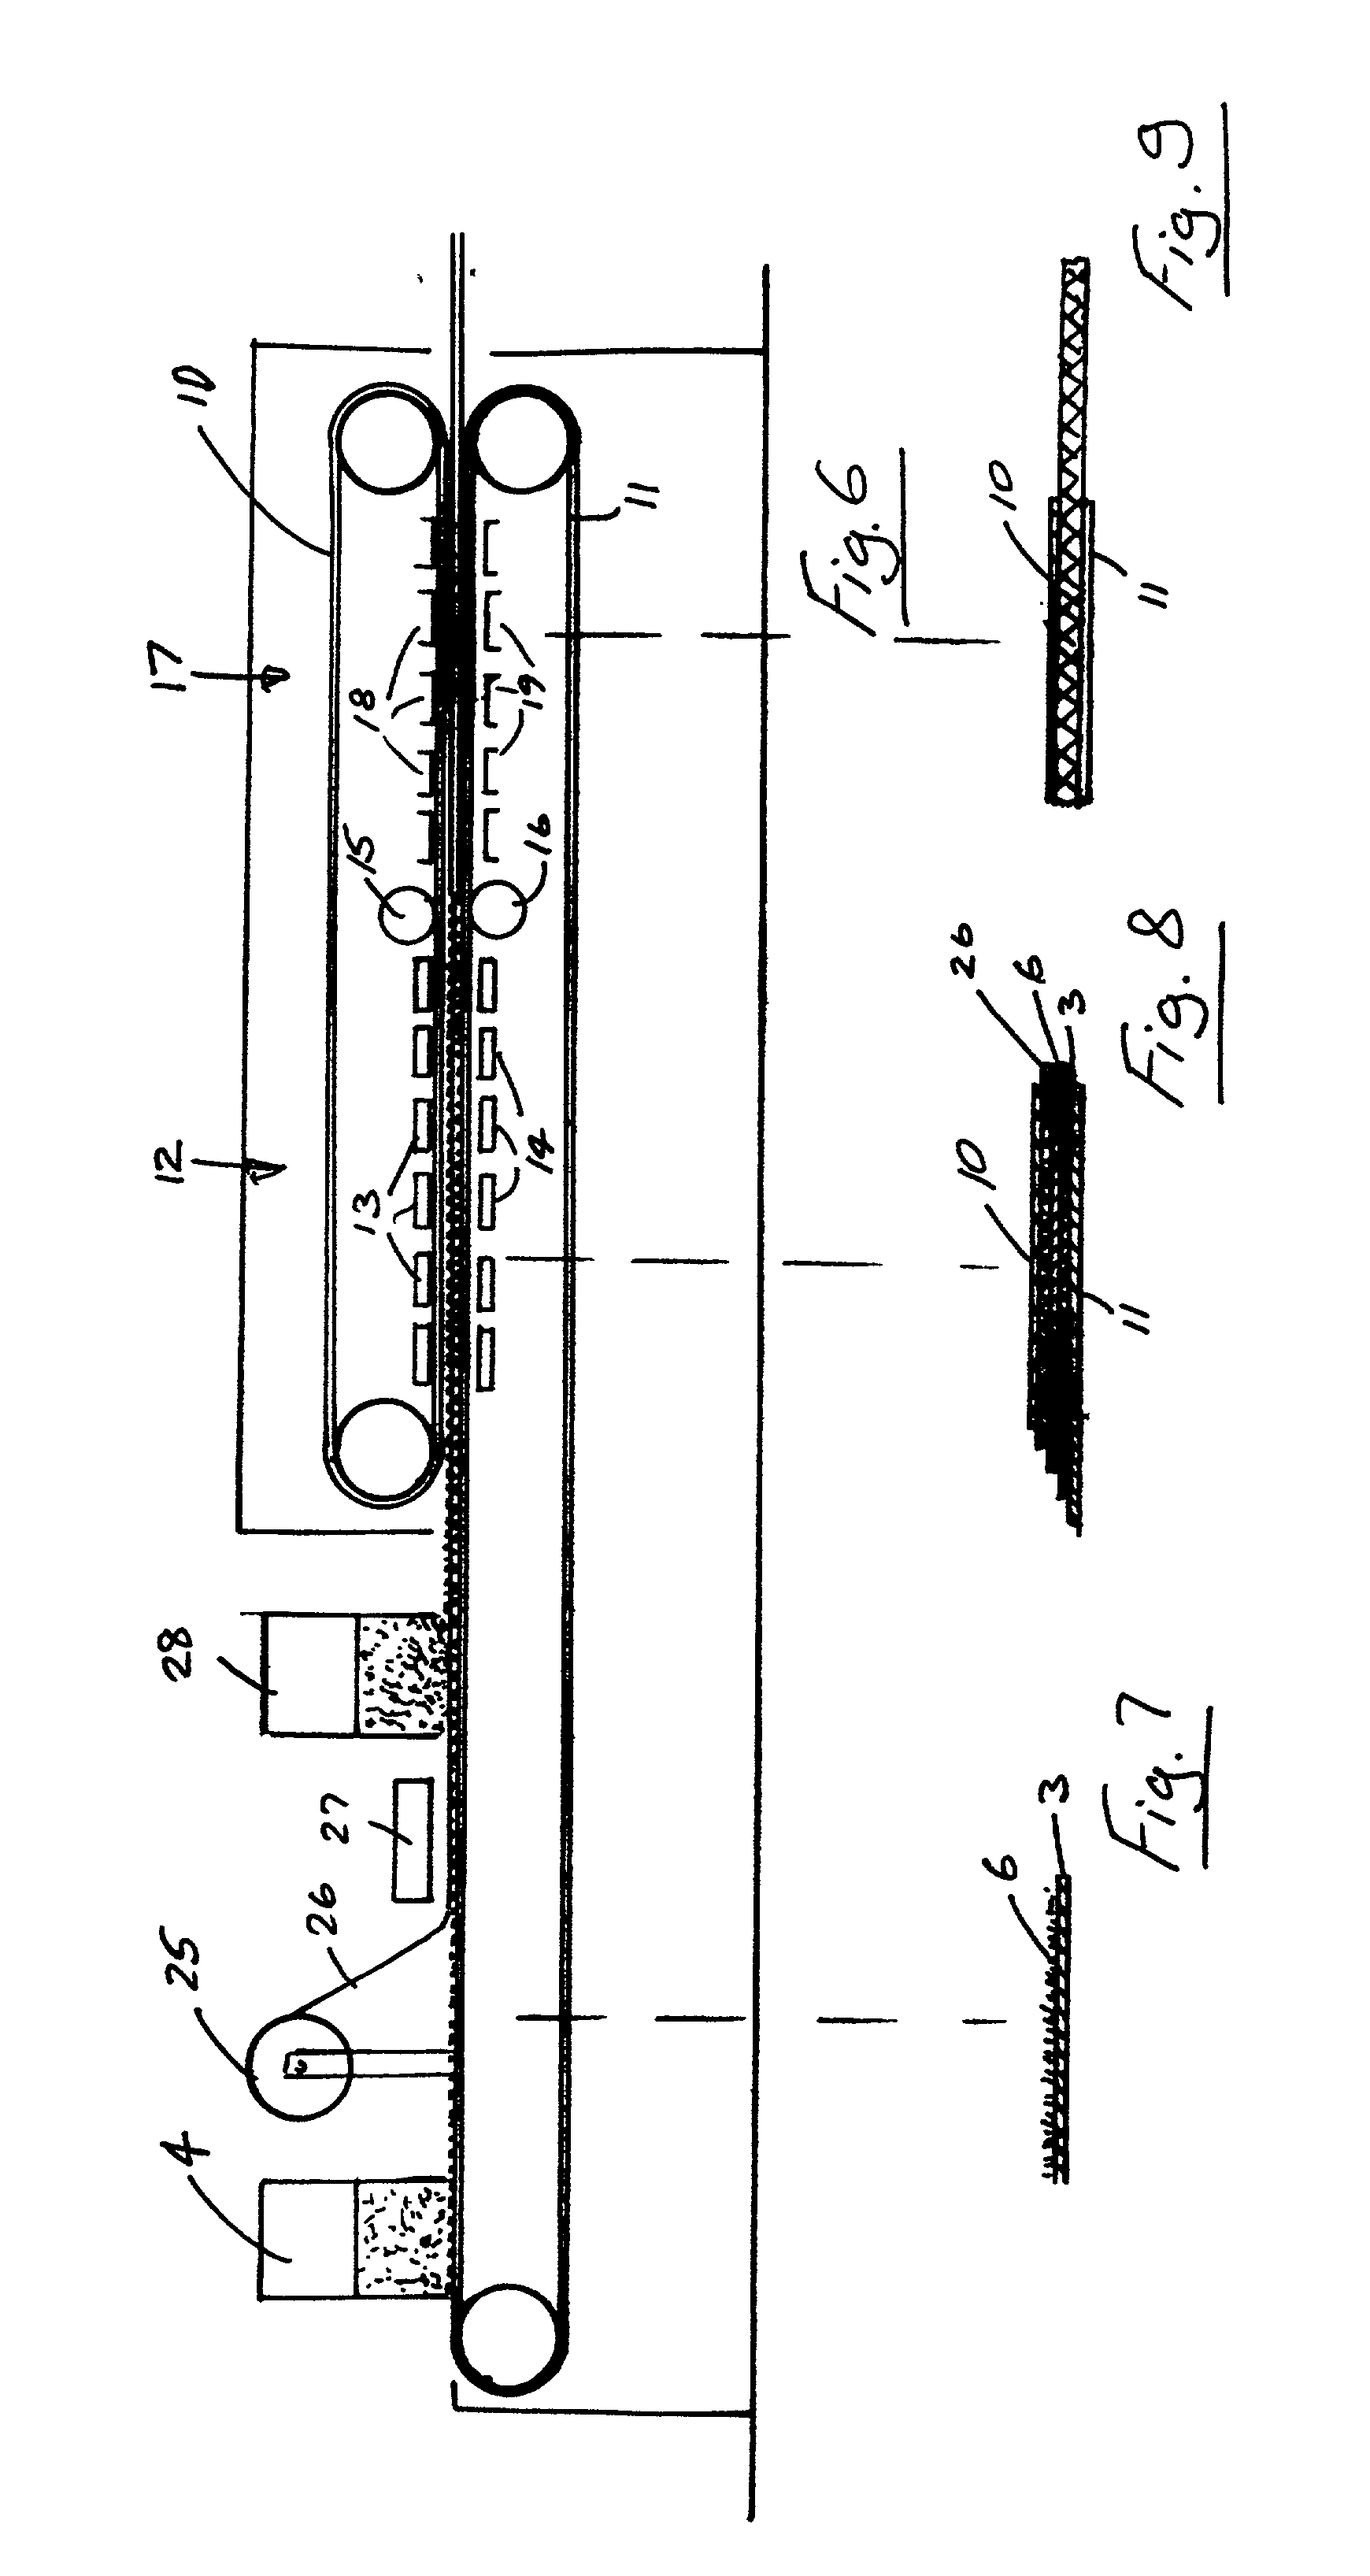 Method for manufacturing a floor covering